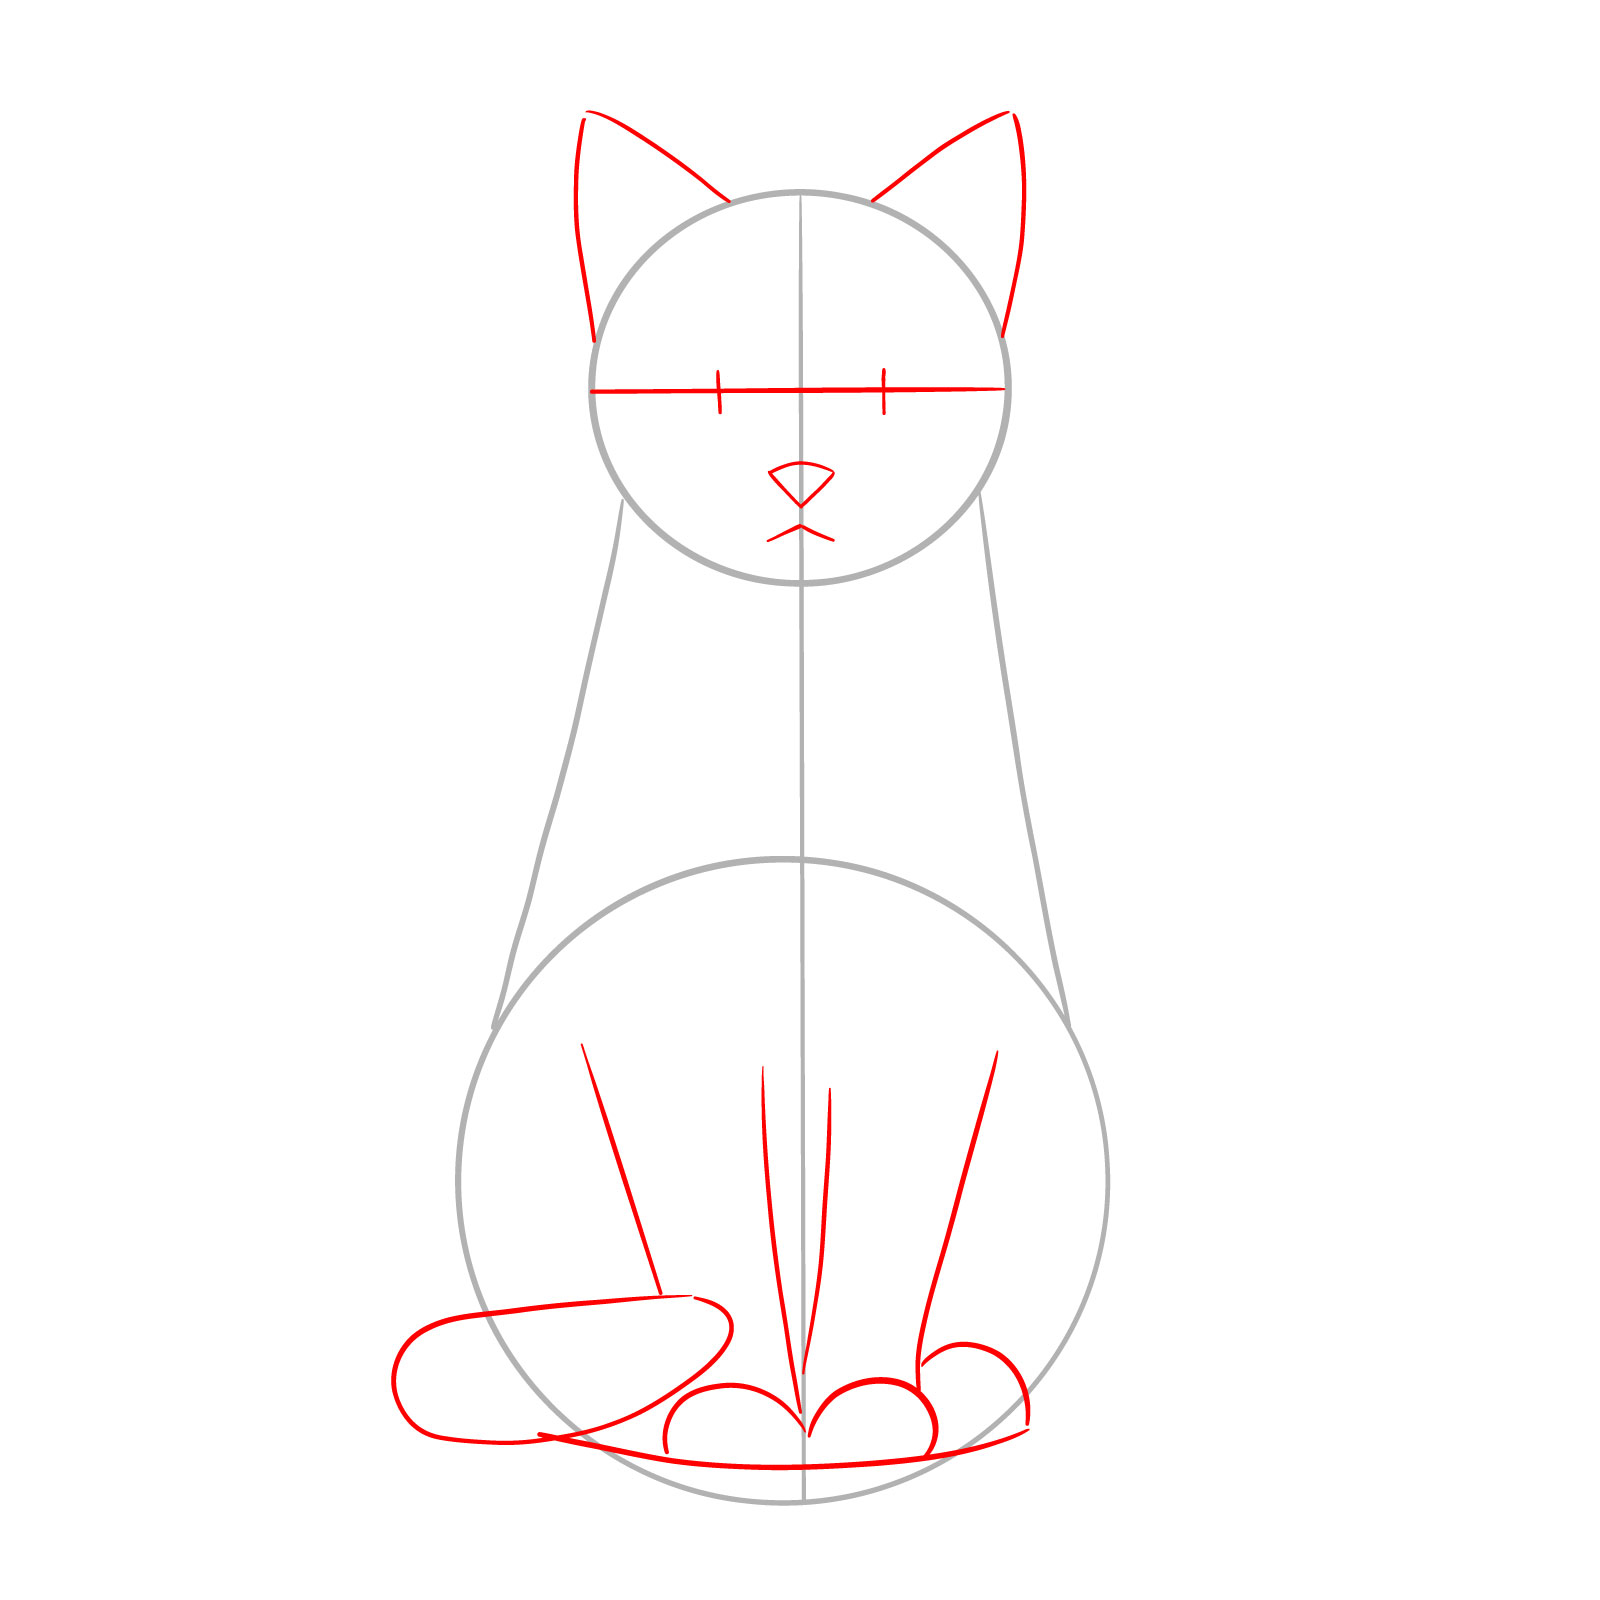 Initial guide lines for a sitting cat's facial features and basic leg shapes - step 02